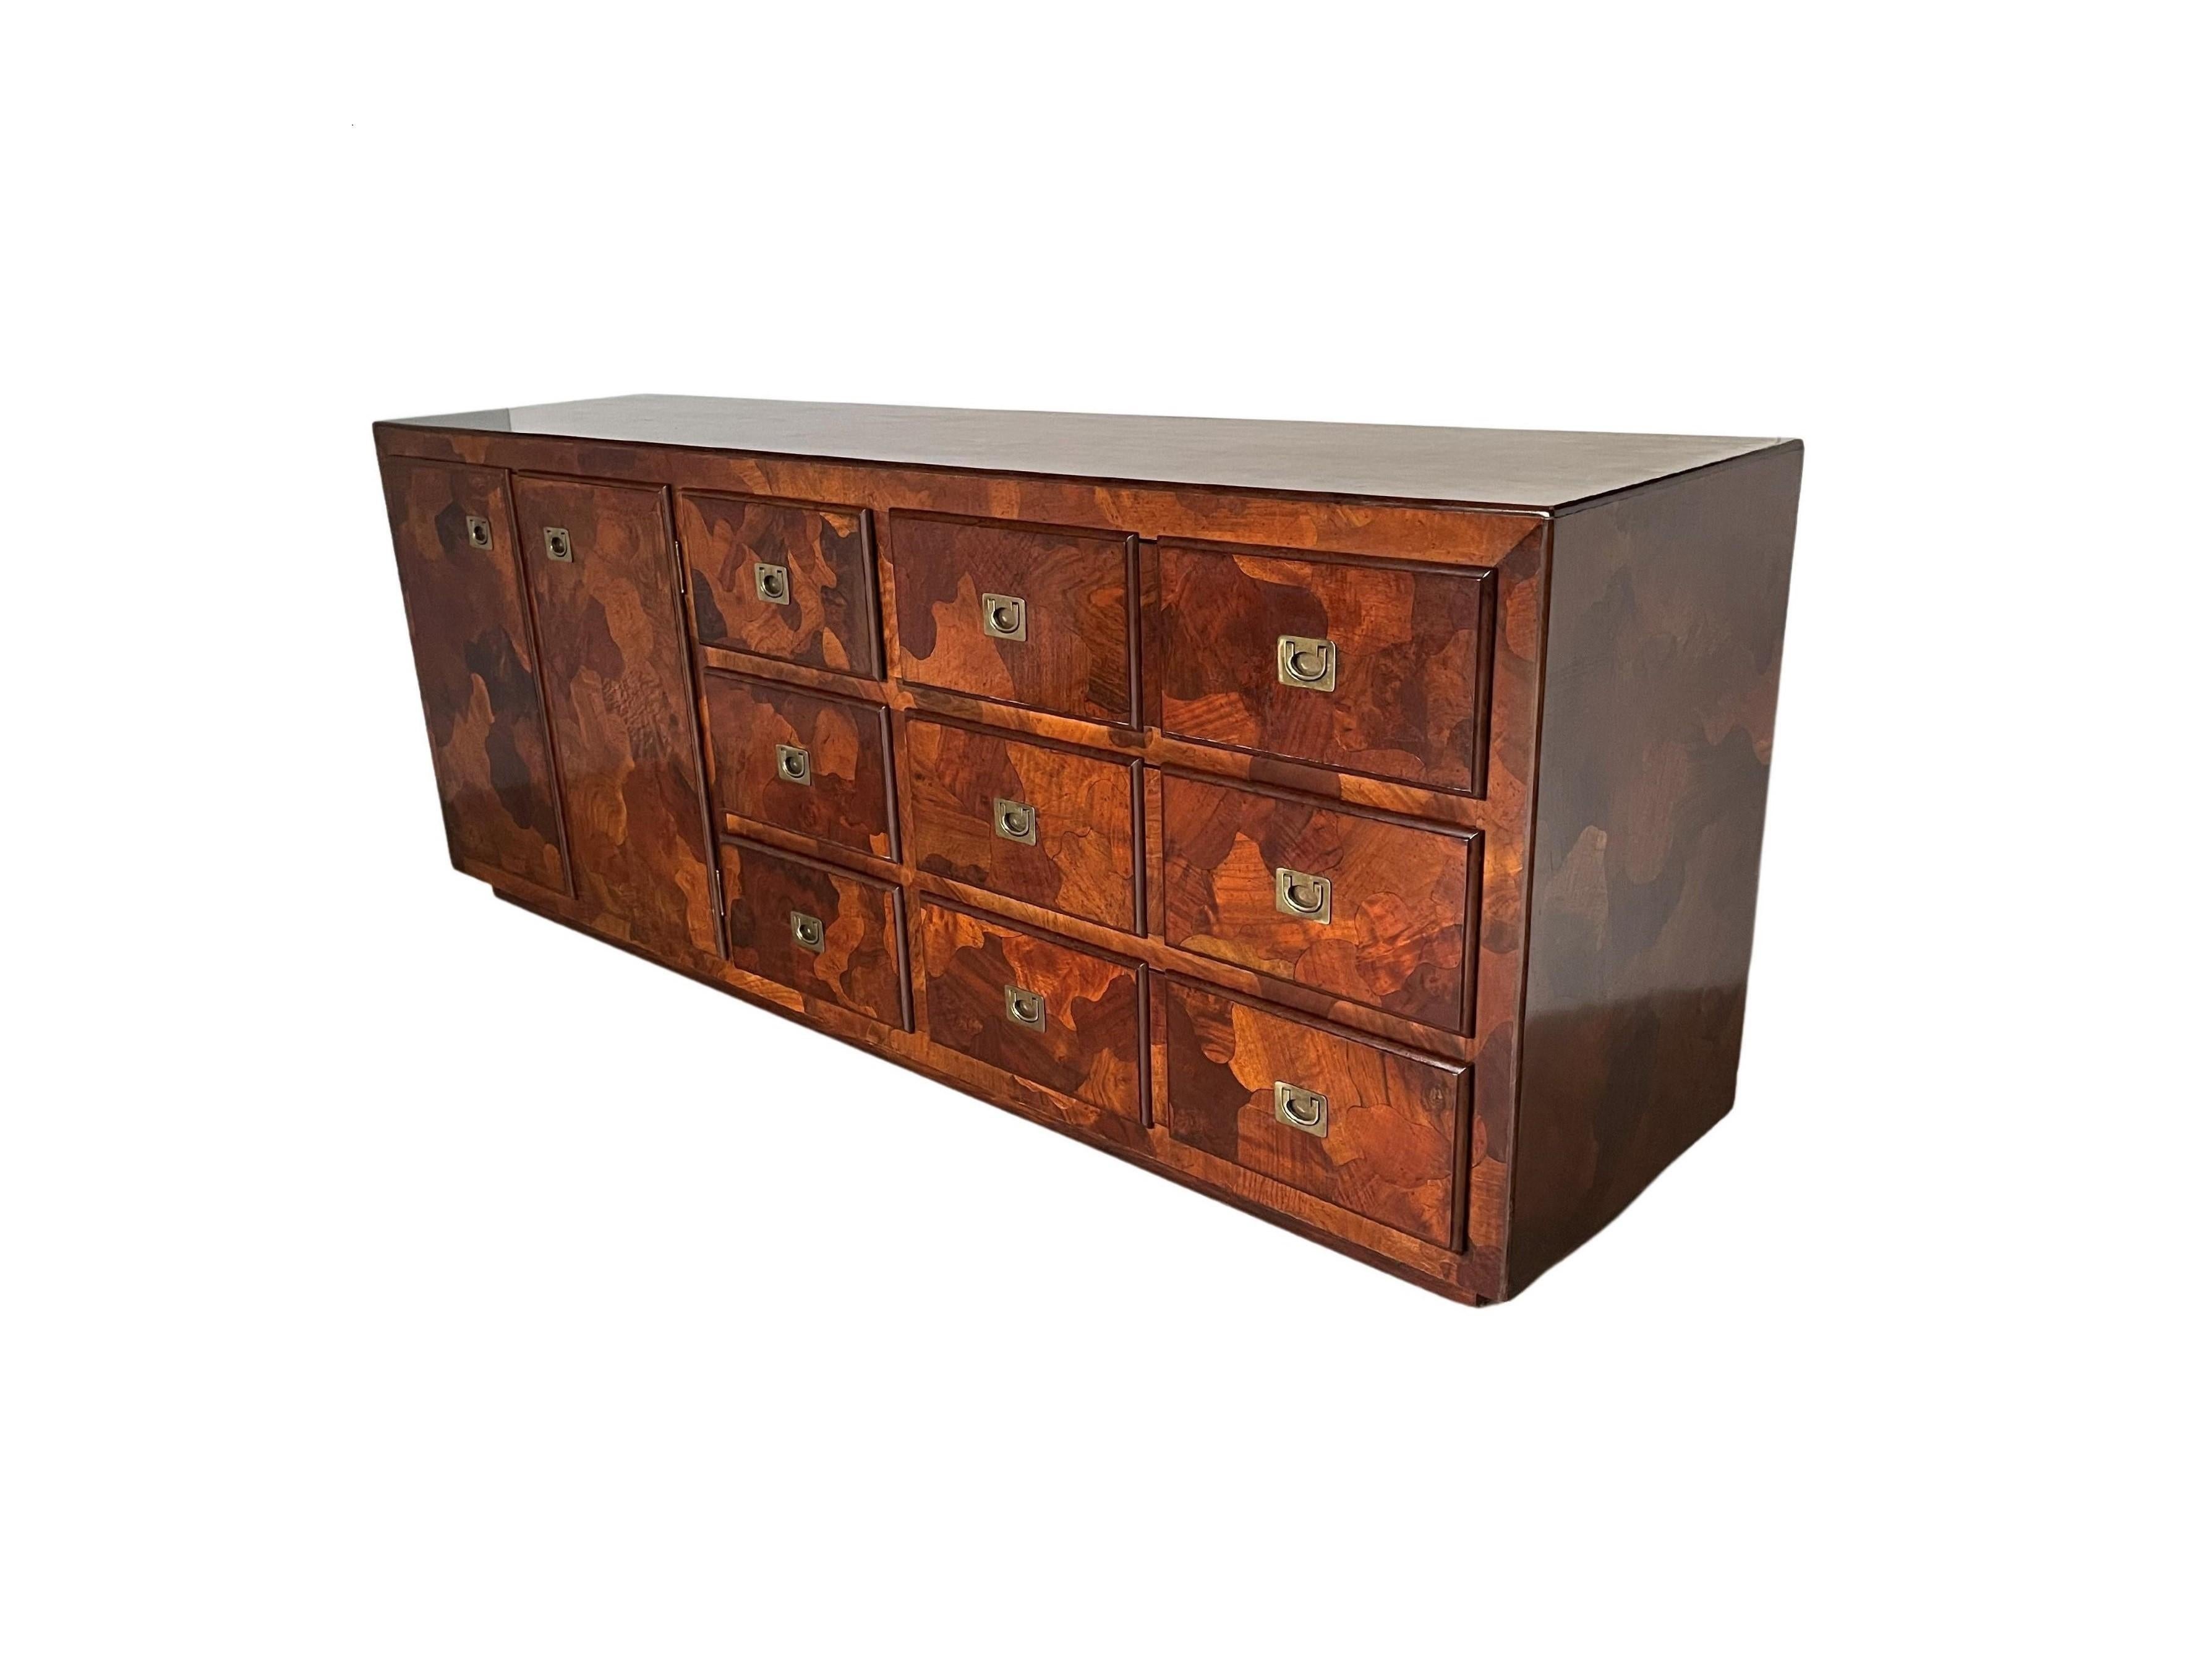 Truly visually enticing Italian crafted dresser. This piece features the most magnificent patchwork design with beautifully rendered 